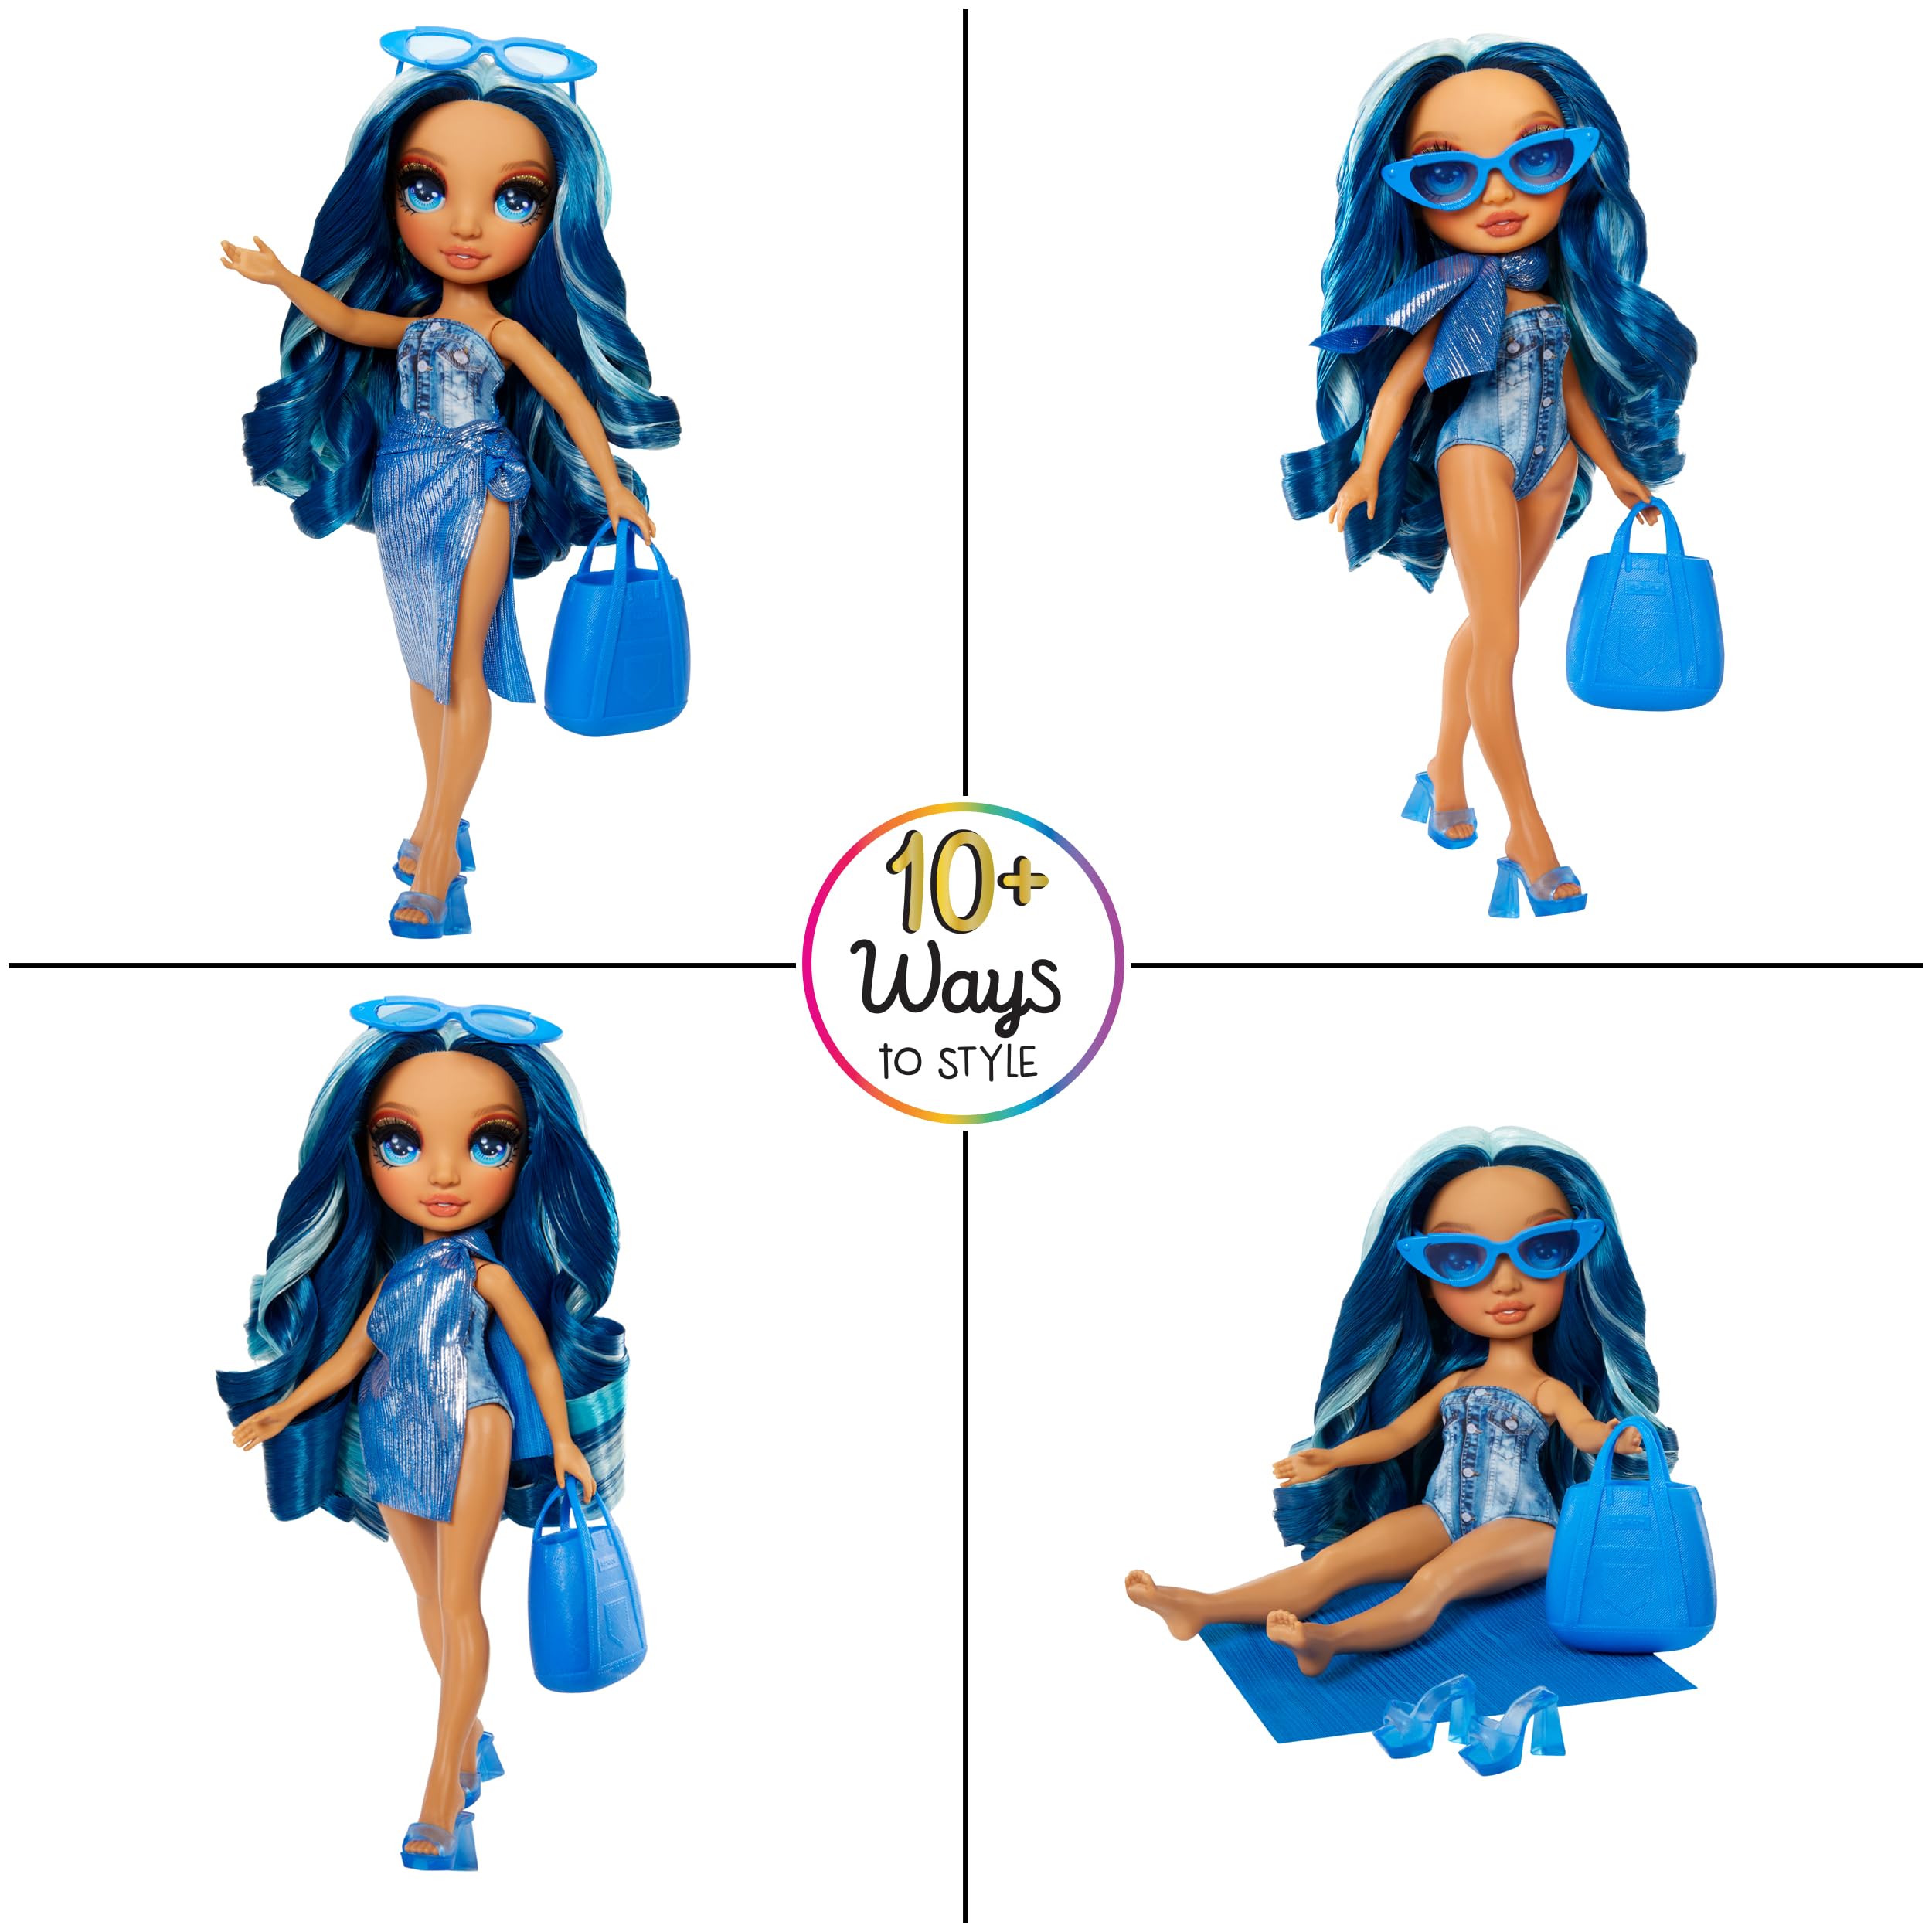 Rainbow High Swim & Style Skyler (Blue) 11” Doll with Shimmery Wrap to Style 10+ Ways, Removable Swimsuit, Sandals, Fun Play Accessories. Kids Toy Gift Ages 4-12 Years